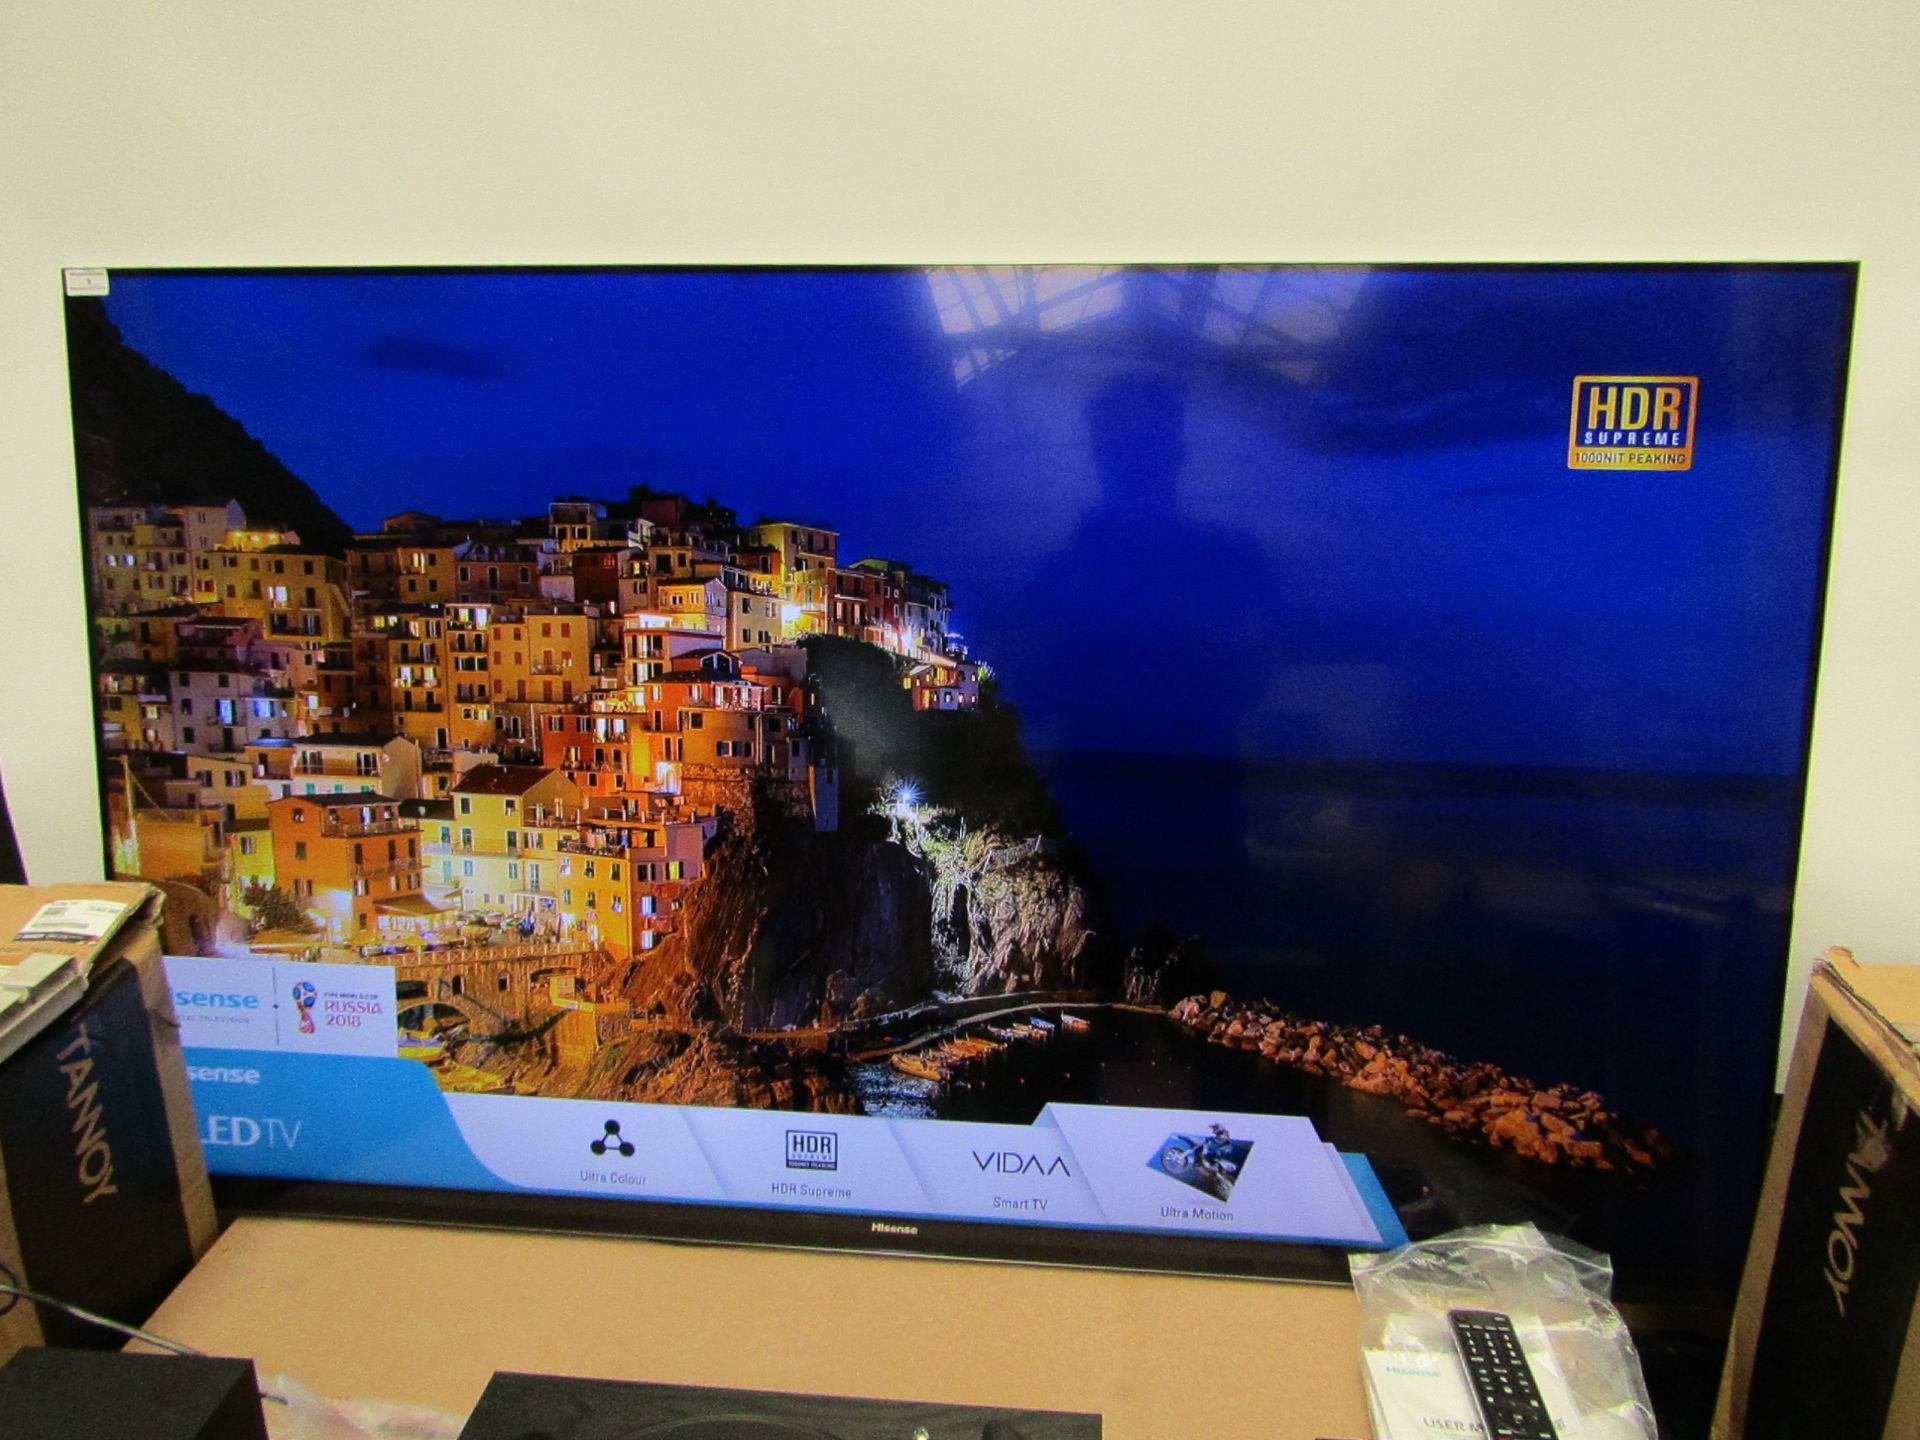 Hisense 65NU8700, 65" 4K, Ultra HD, HDR smart ULED TV with freeview play, Tv is fully tested working